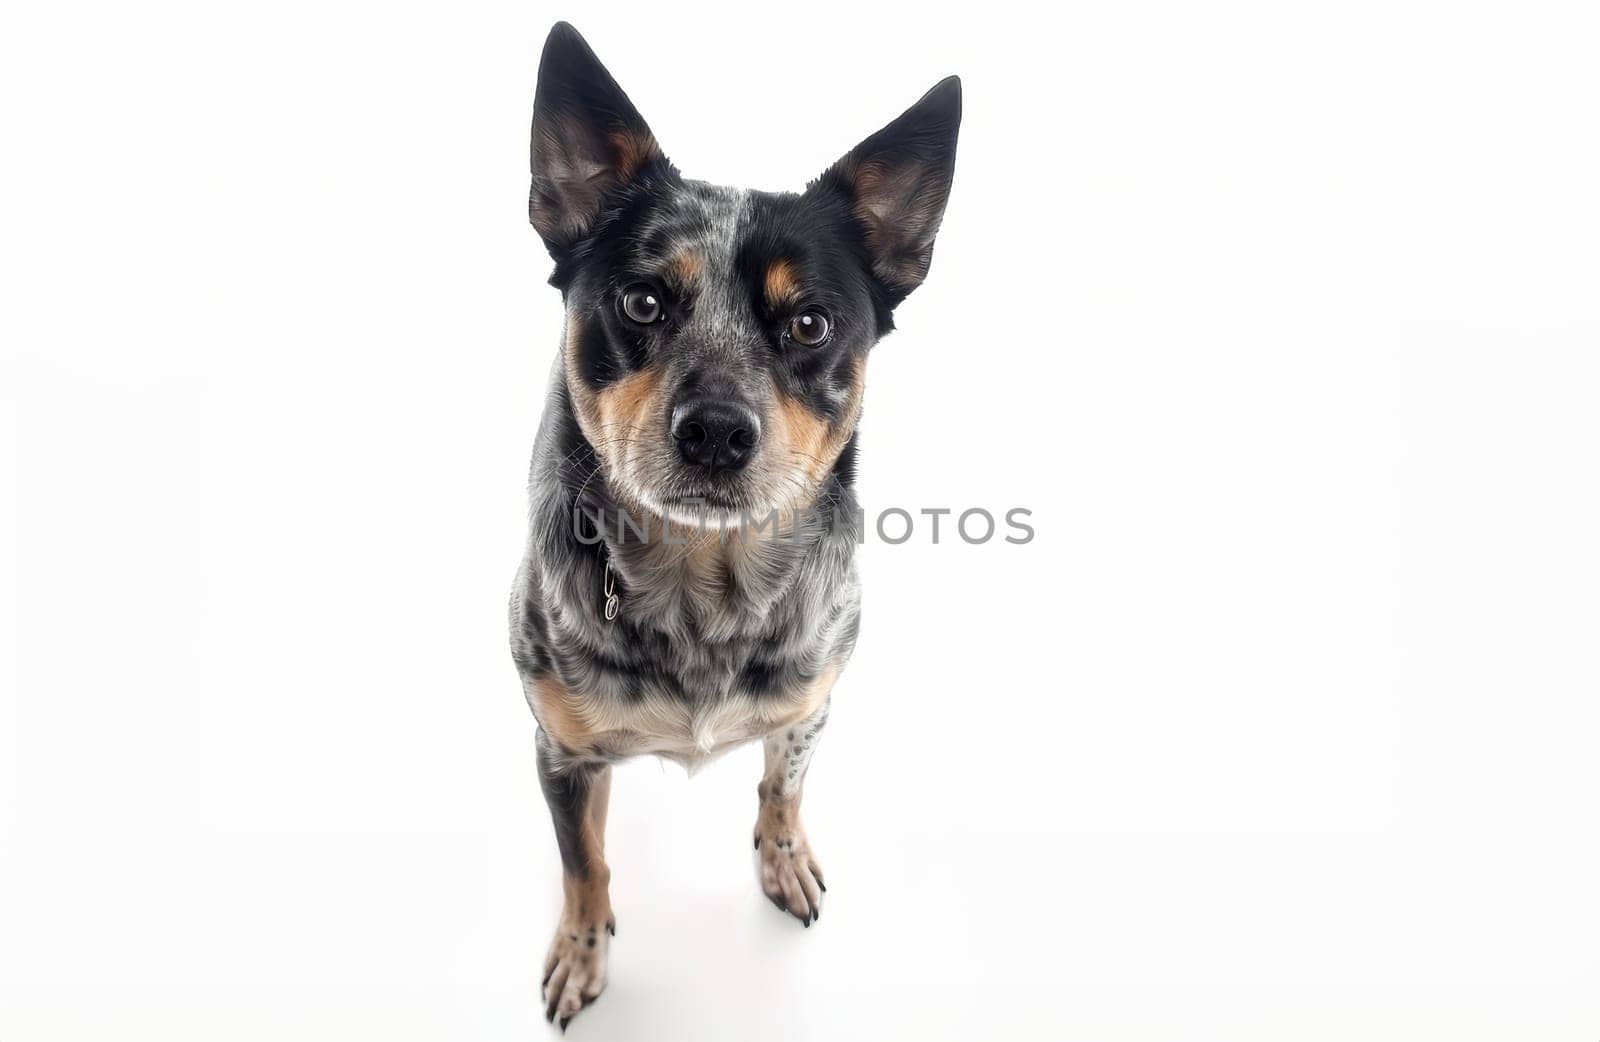 A direct front view of an Australian Cattle Dog with a sharp, inquisitive look. Its compact stature and mottled coat are clearly visible against the white backdrop